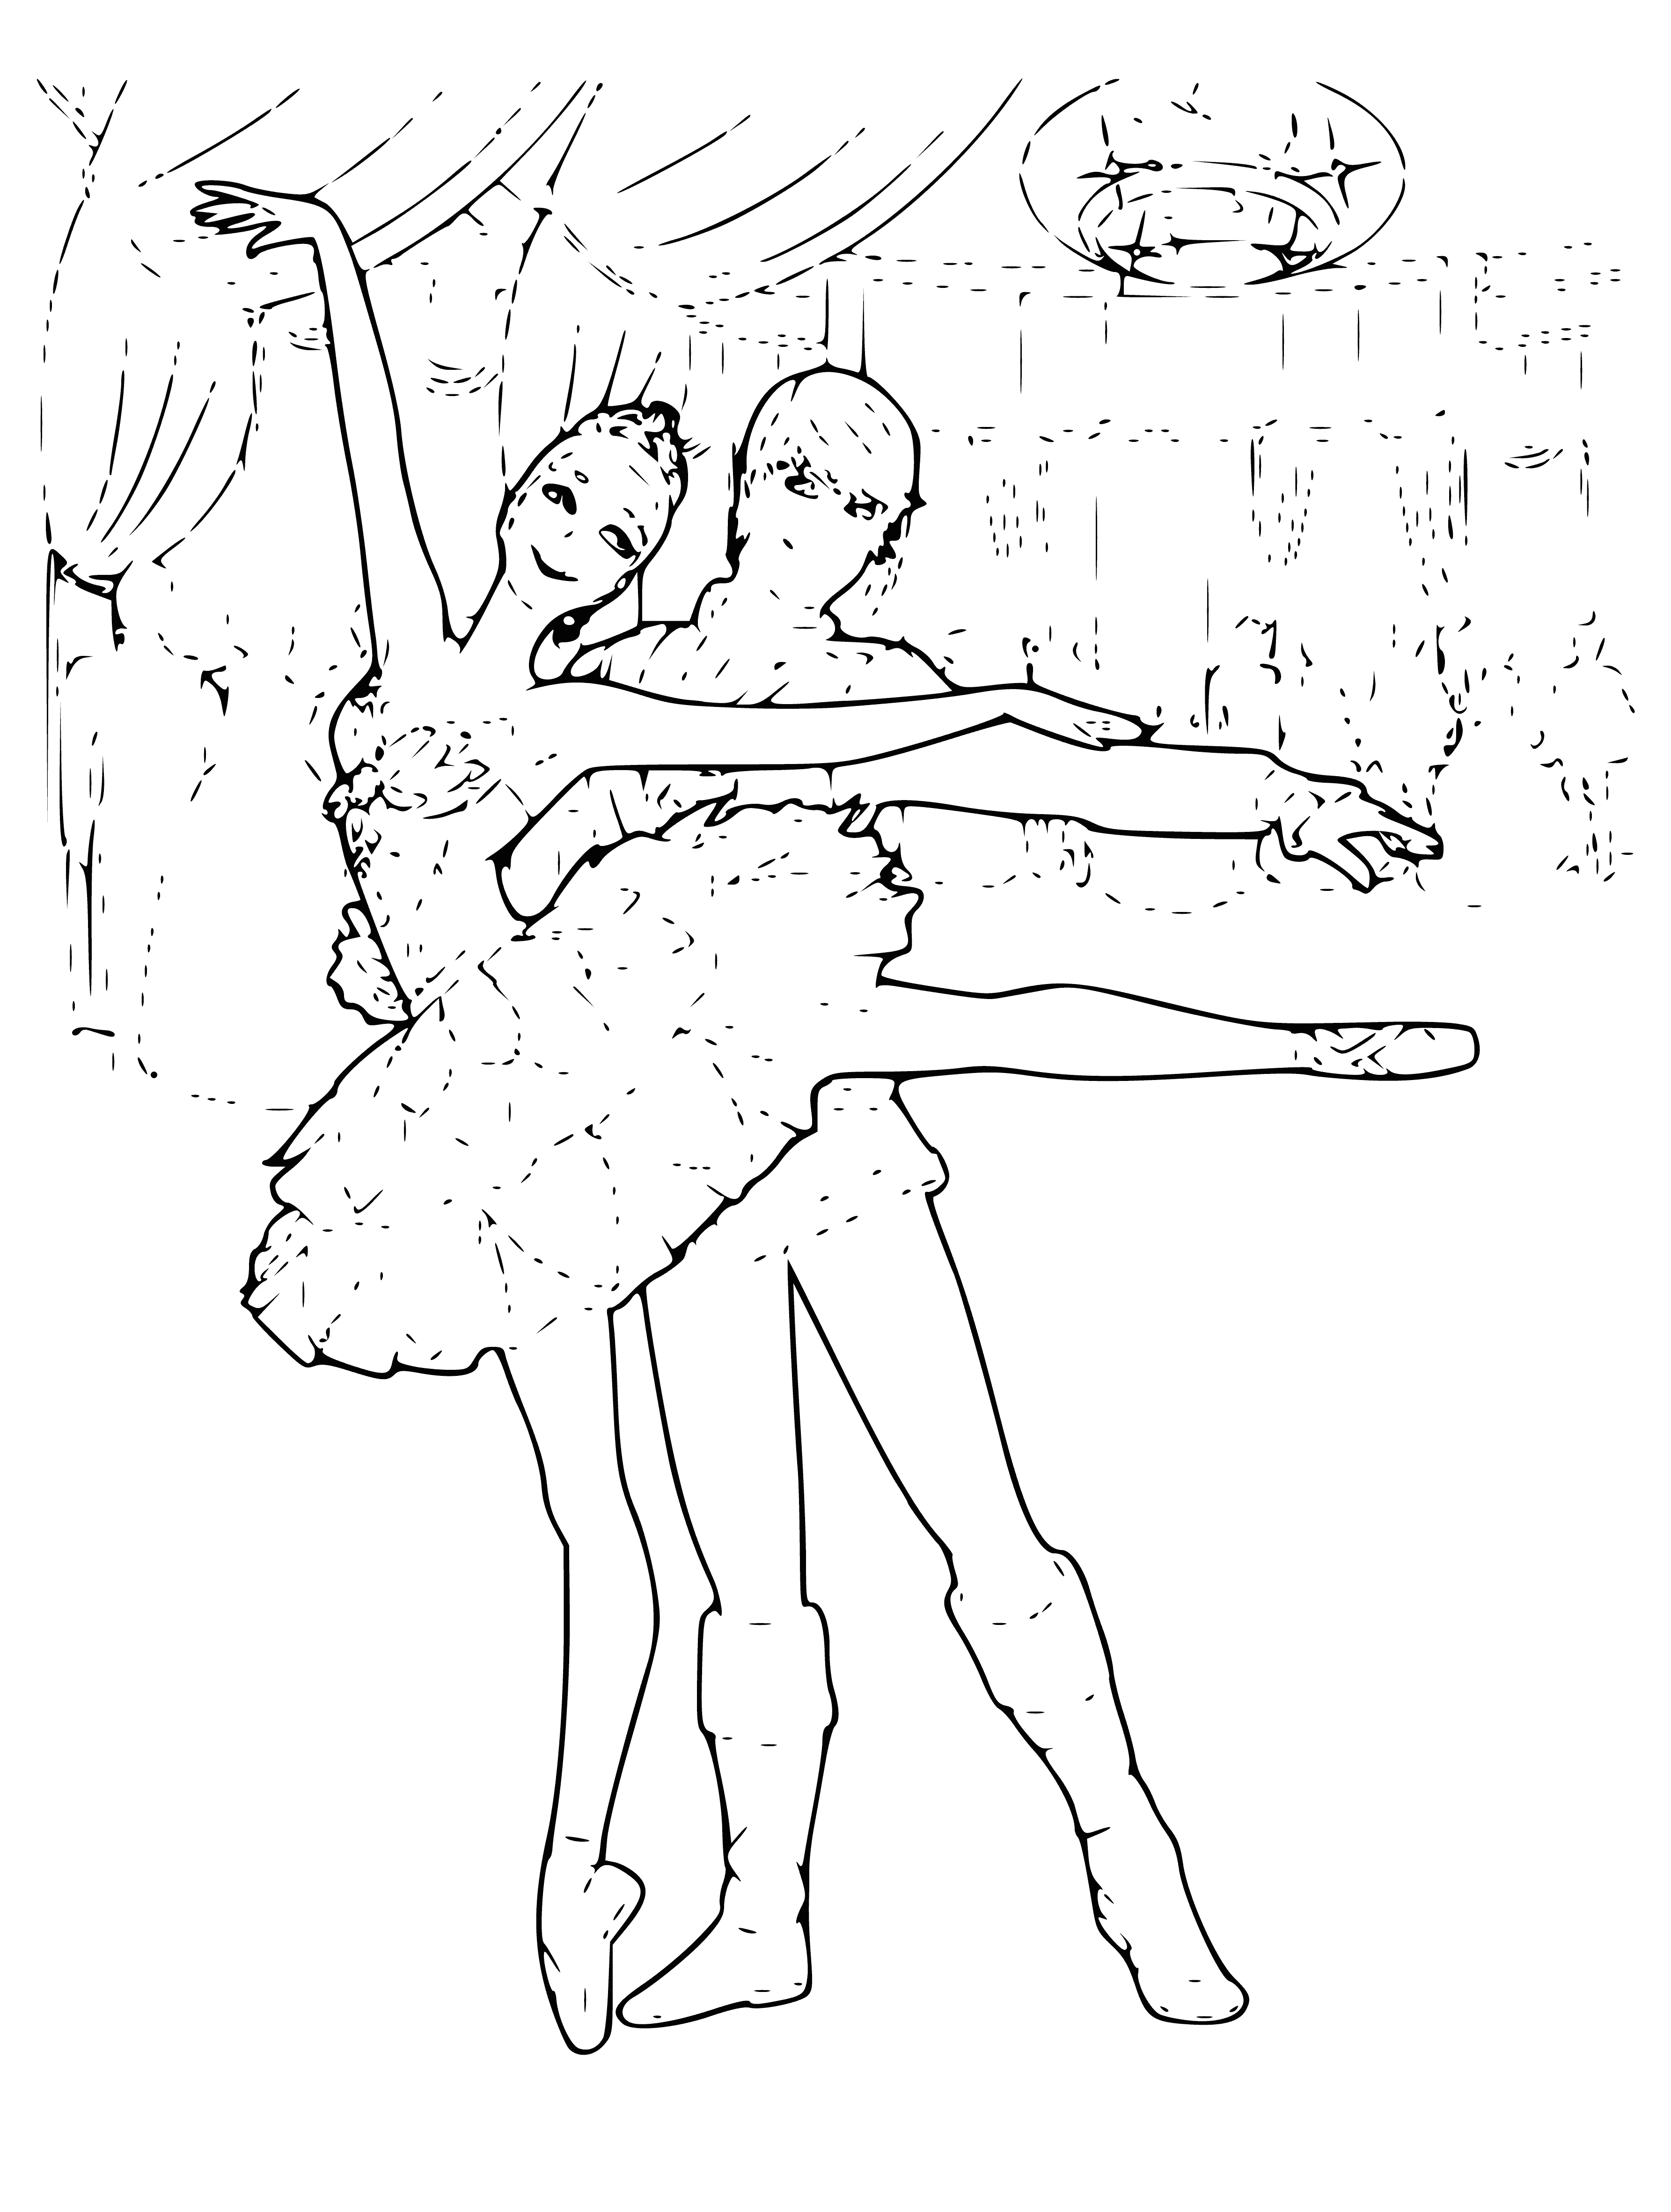 coloring page: Ballerinas in white dresses, tutus & headbands, facing each other & holding hands, ready to dance! Coloring page to bring their moves to life. #coloringpage